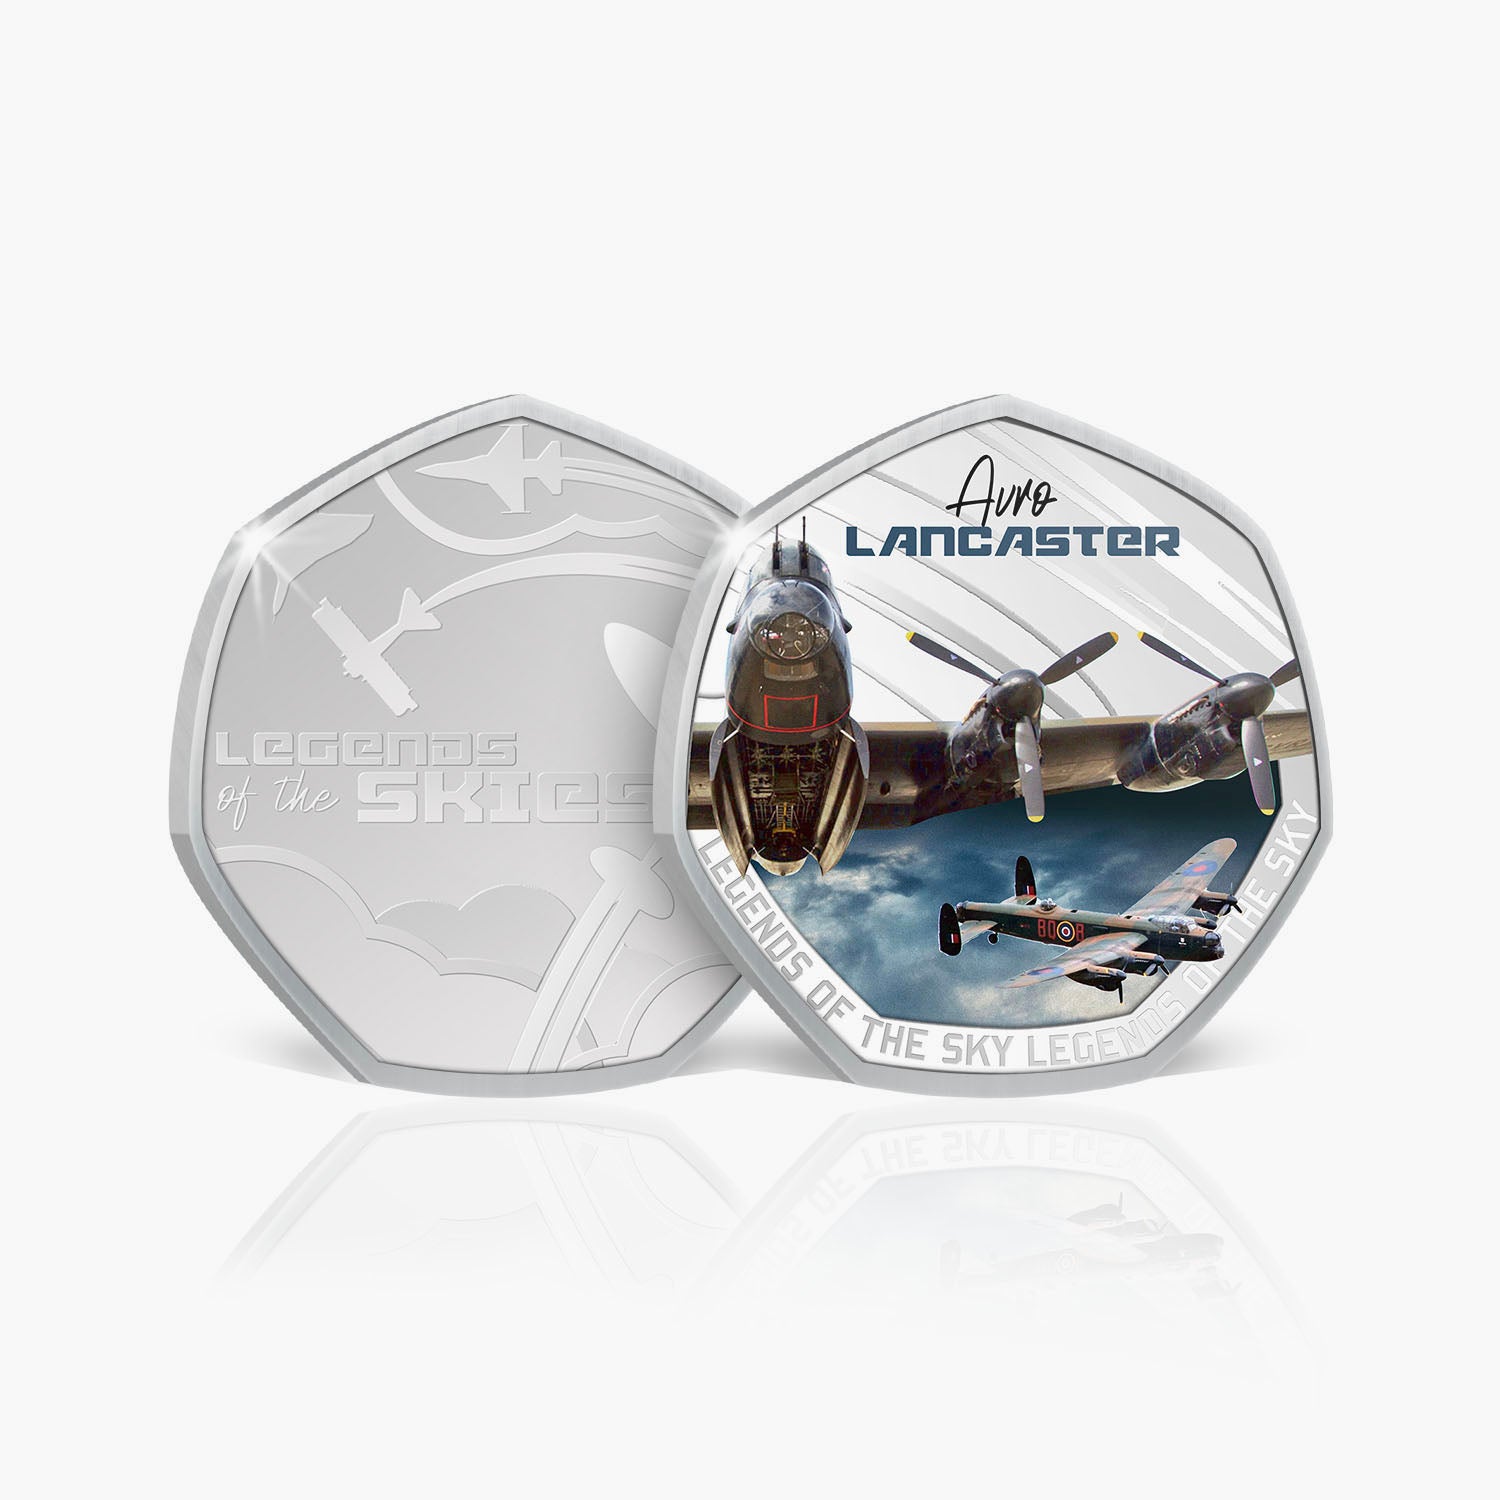 Lancaster Silver-Plated Commemorative